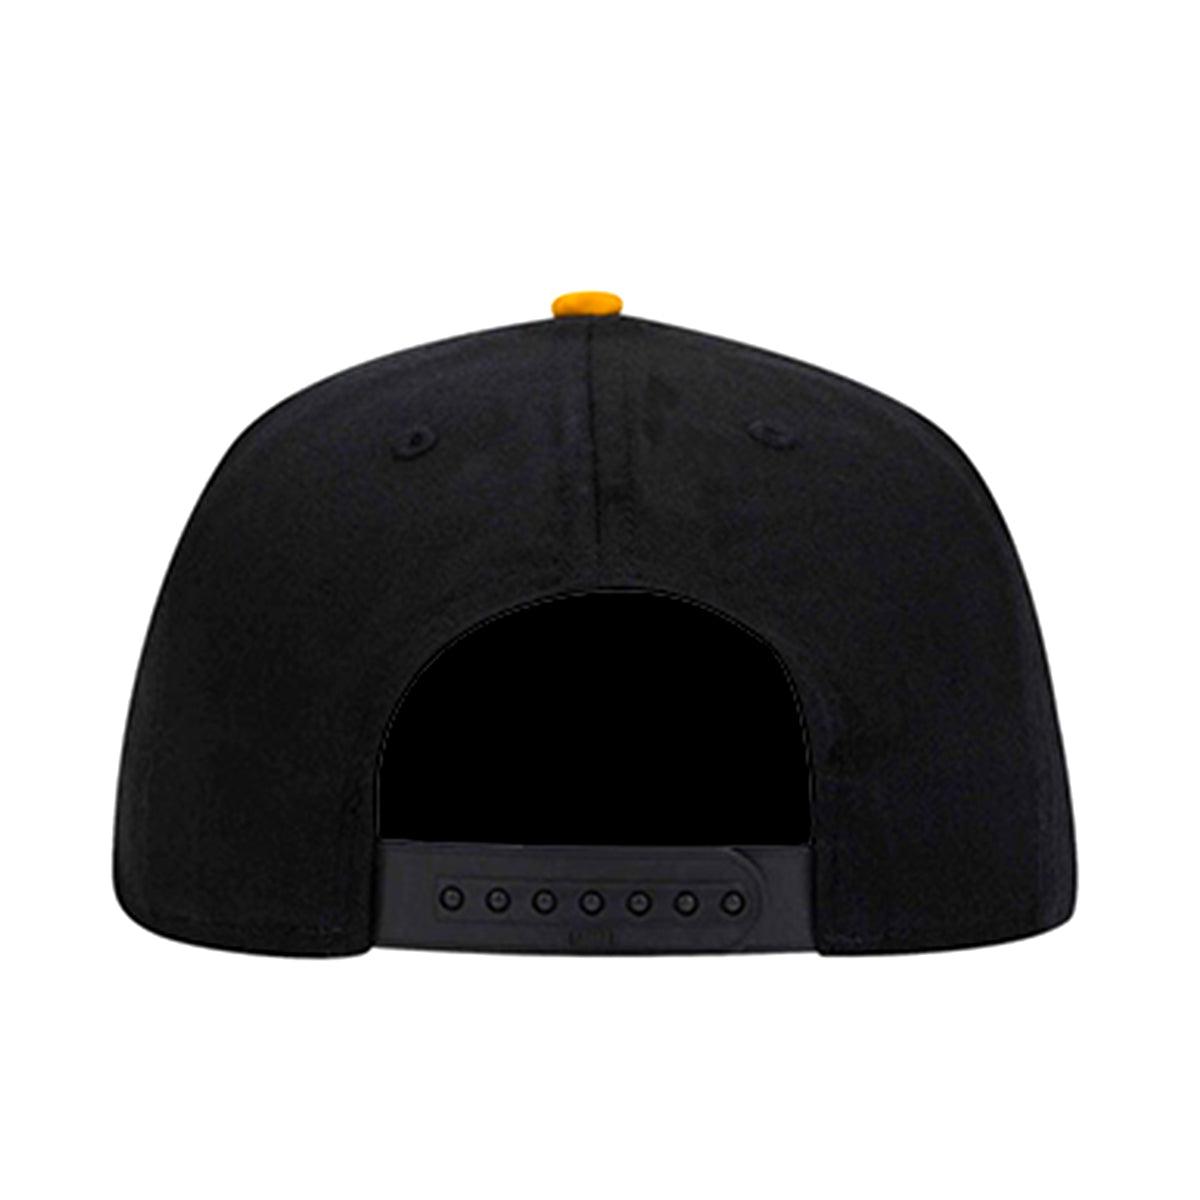 Pins & Bones Hellbound Hat, Hell Bound Cap, Black & Yellow Gothic Snapback Hat, One Size Fits All